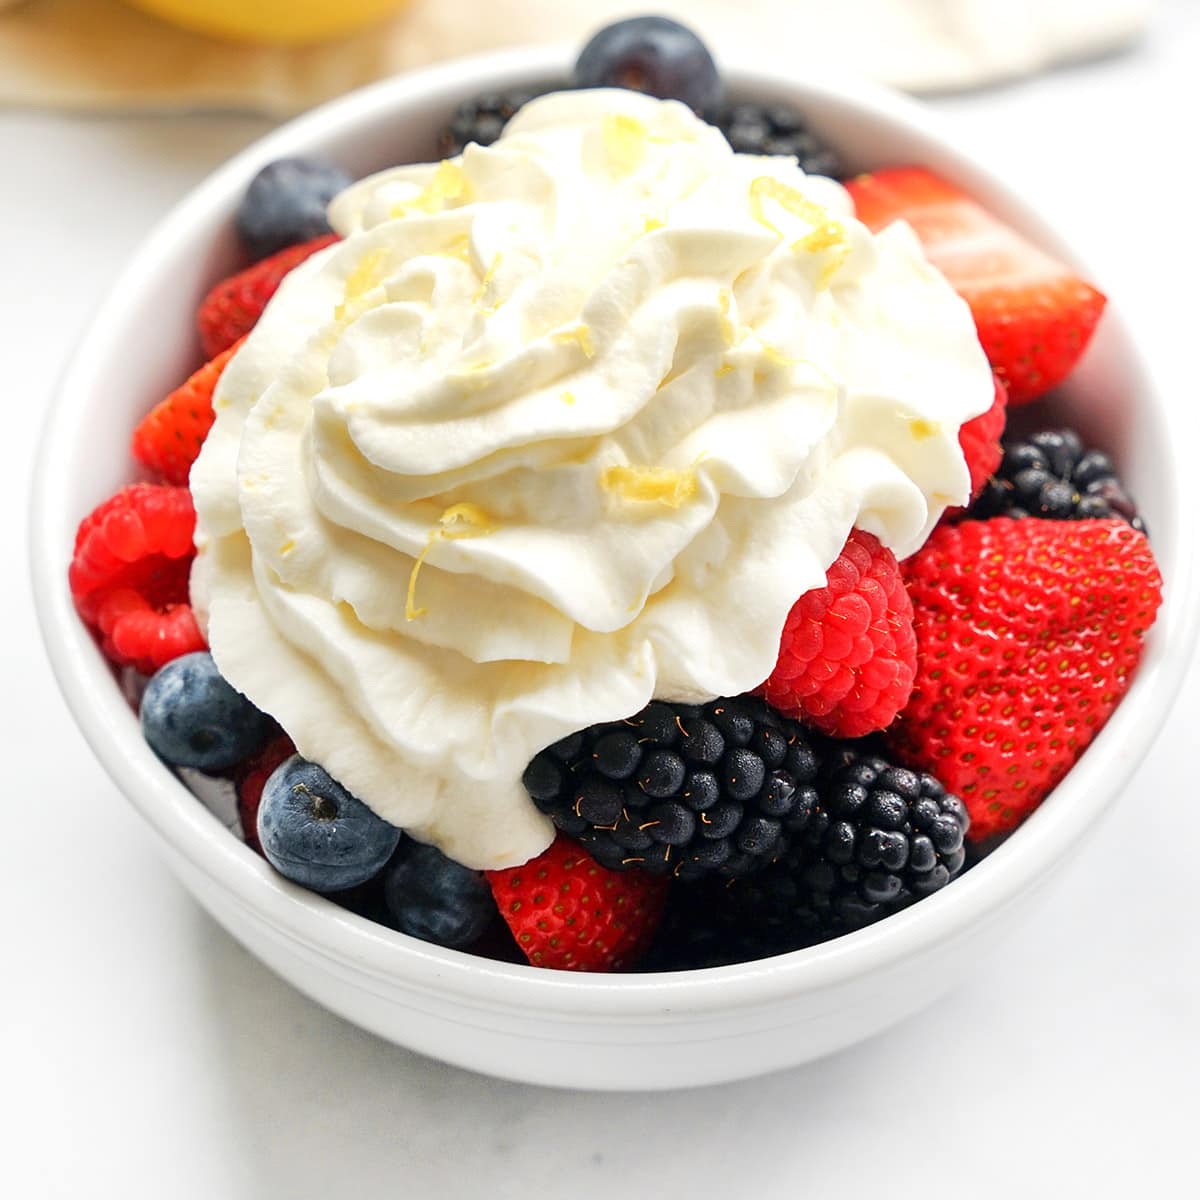 https://www.fivehearthome.com/wp-content/uploads/2023/03/Lemon-Whipped-Cream-by-Five-Heart-Home_1200pxFeatured70.jpg